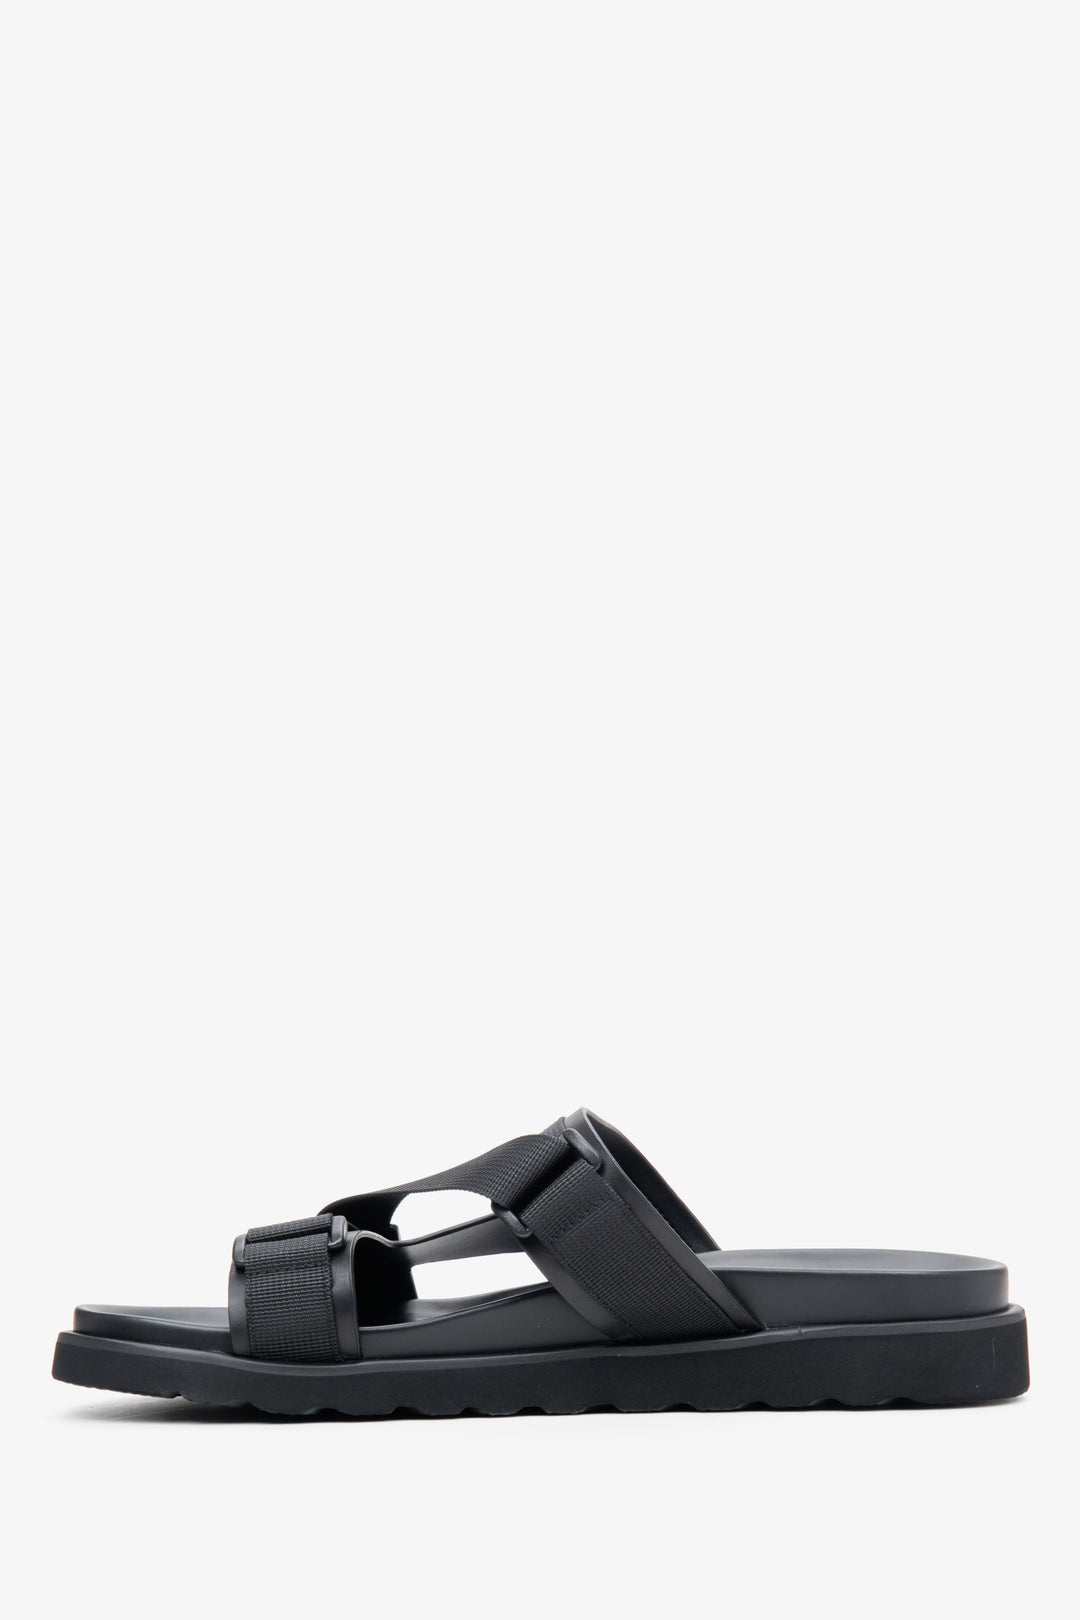 Men's black slides with flexible sole, made from genuine leather and textiles - shoe profile.